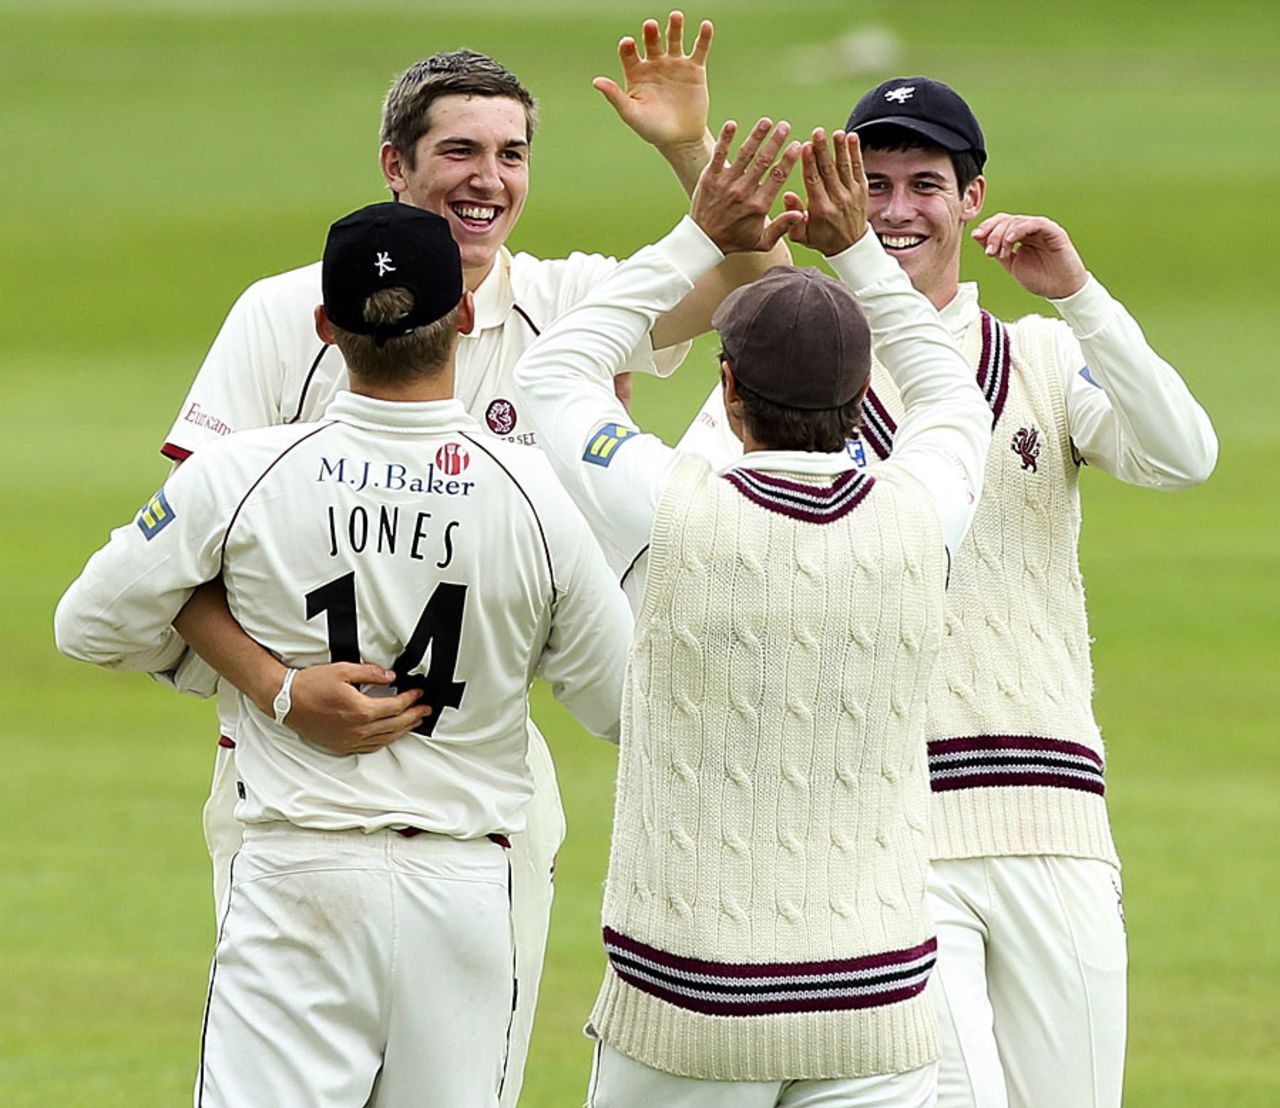 Craig Overton took two wickets in two balls, Somerset v South Africans, Tour match, Taunton, 2nd day, July 10, 2012